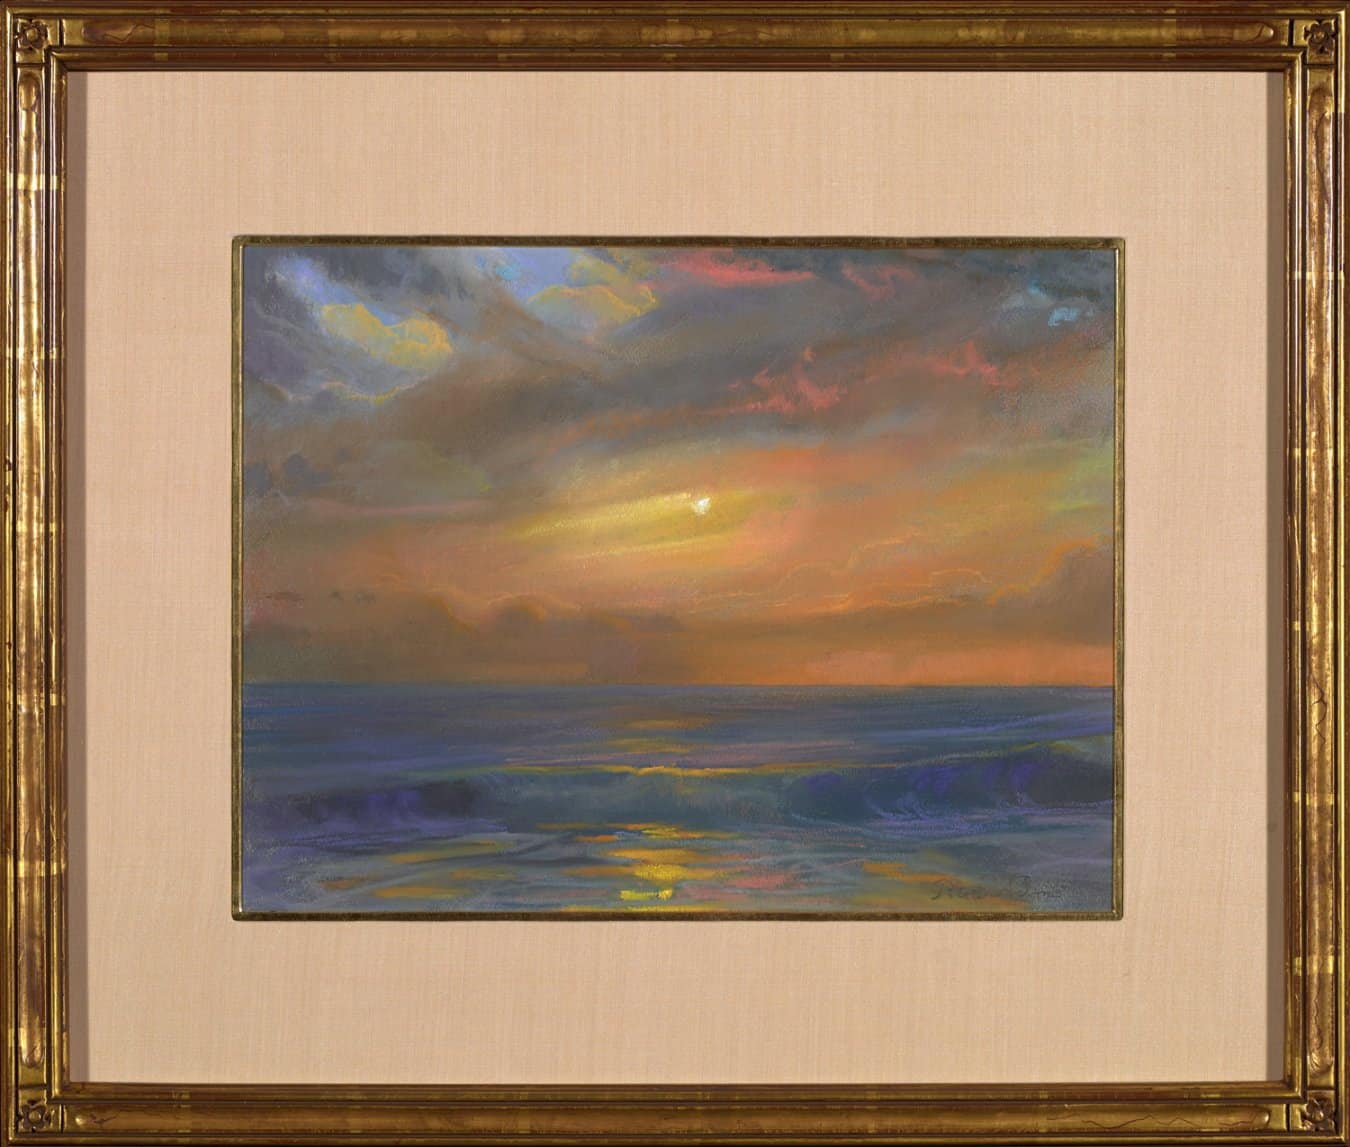 American Legacy Fine Arts presents "Peering Light" a painting by Peter Adams.